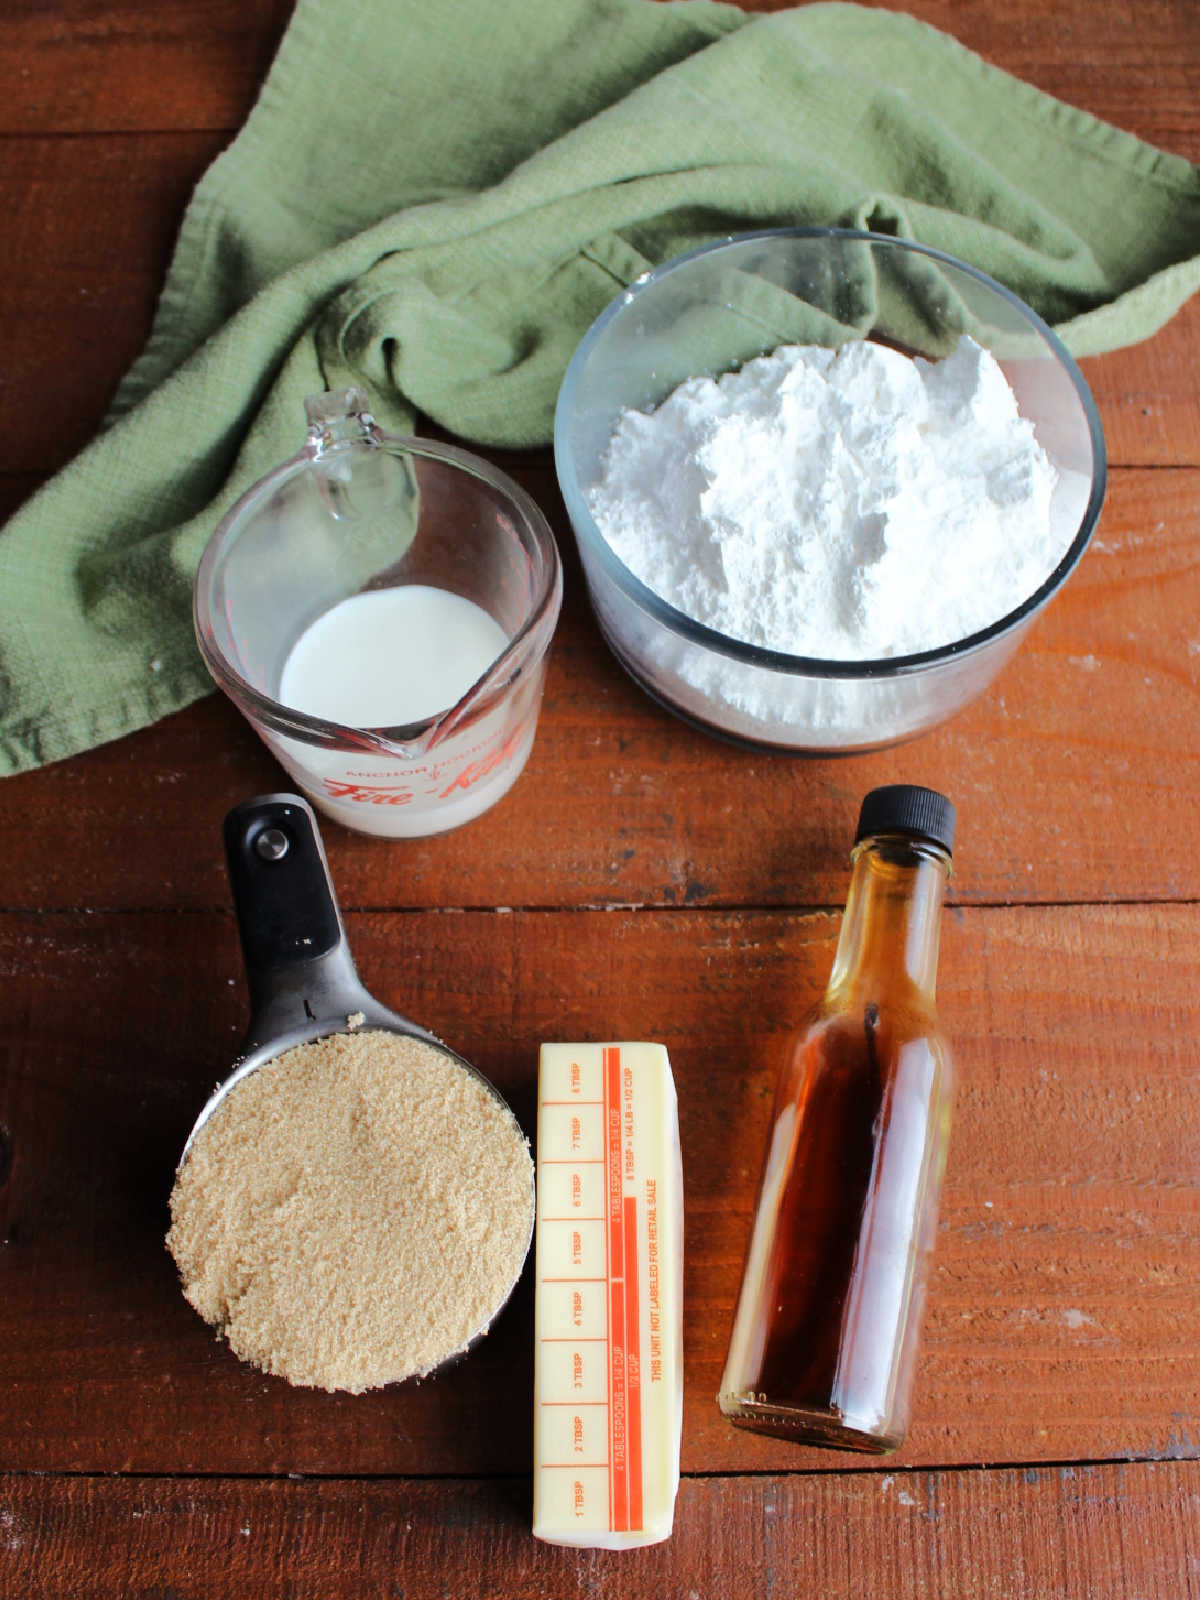 Icing ingredients including butter, brown sugar, milk, vanilla, and powdered sugar ready to get made into penuche icing.